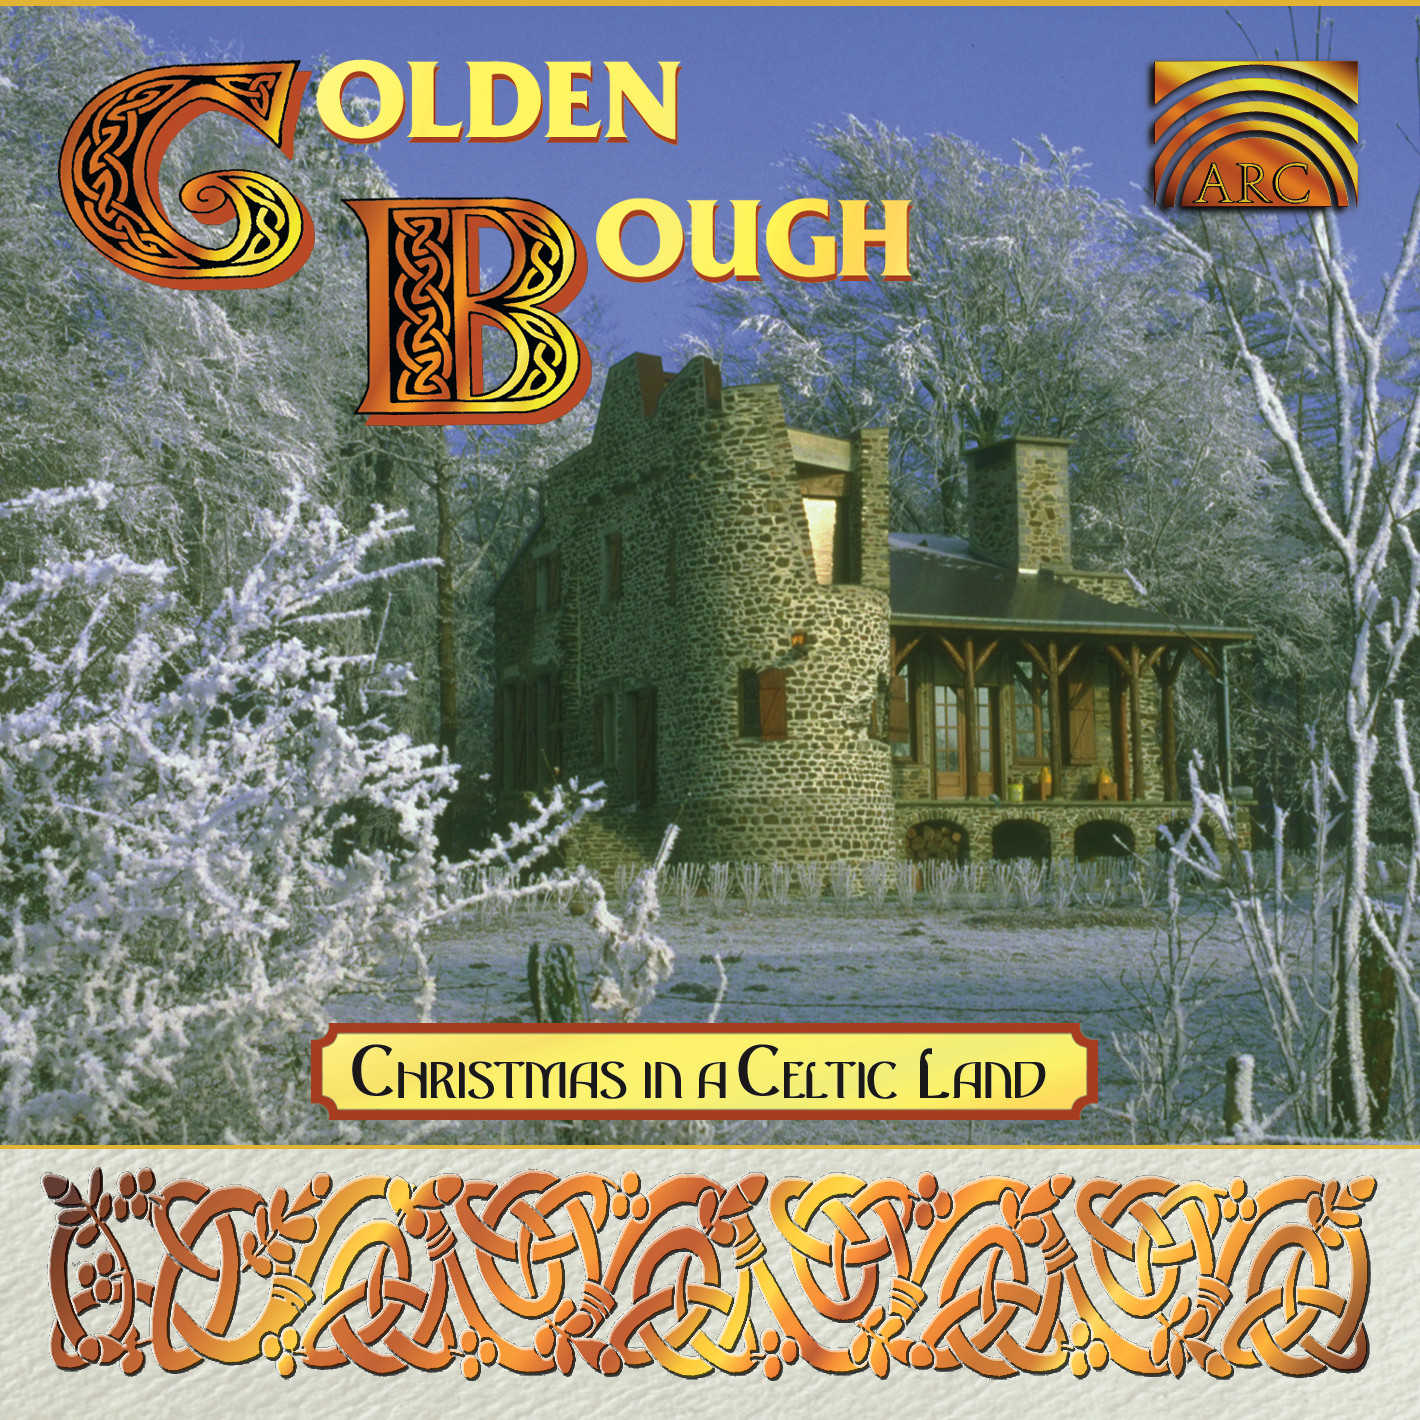 Golden Bough - ARC Music Productions International Limited